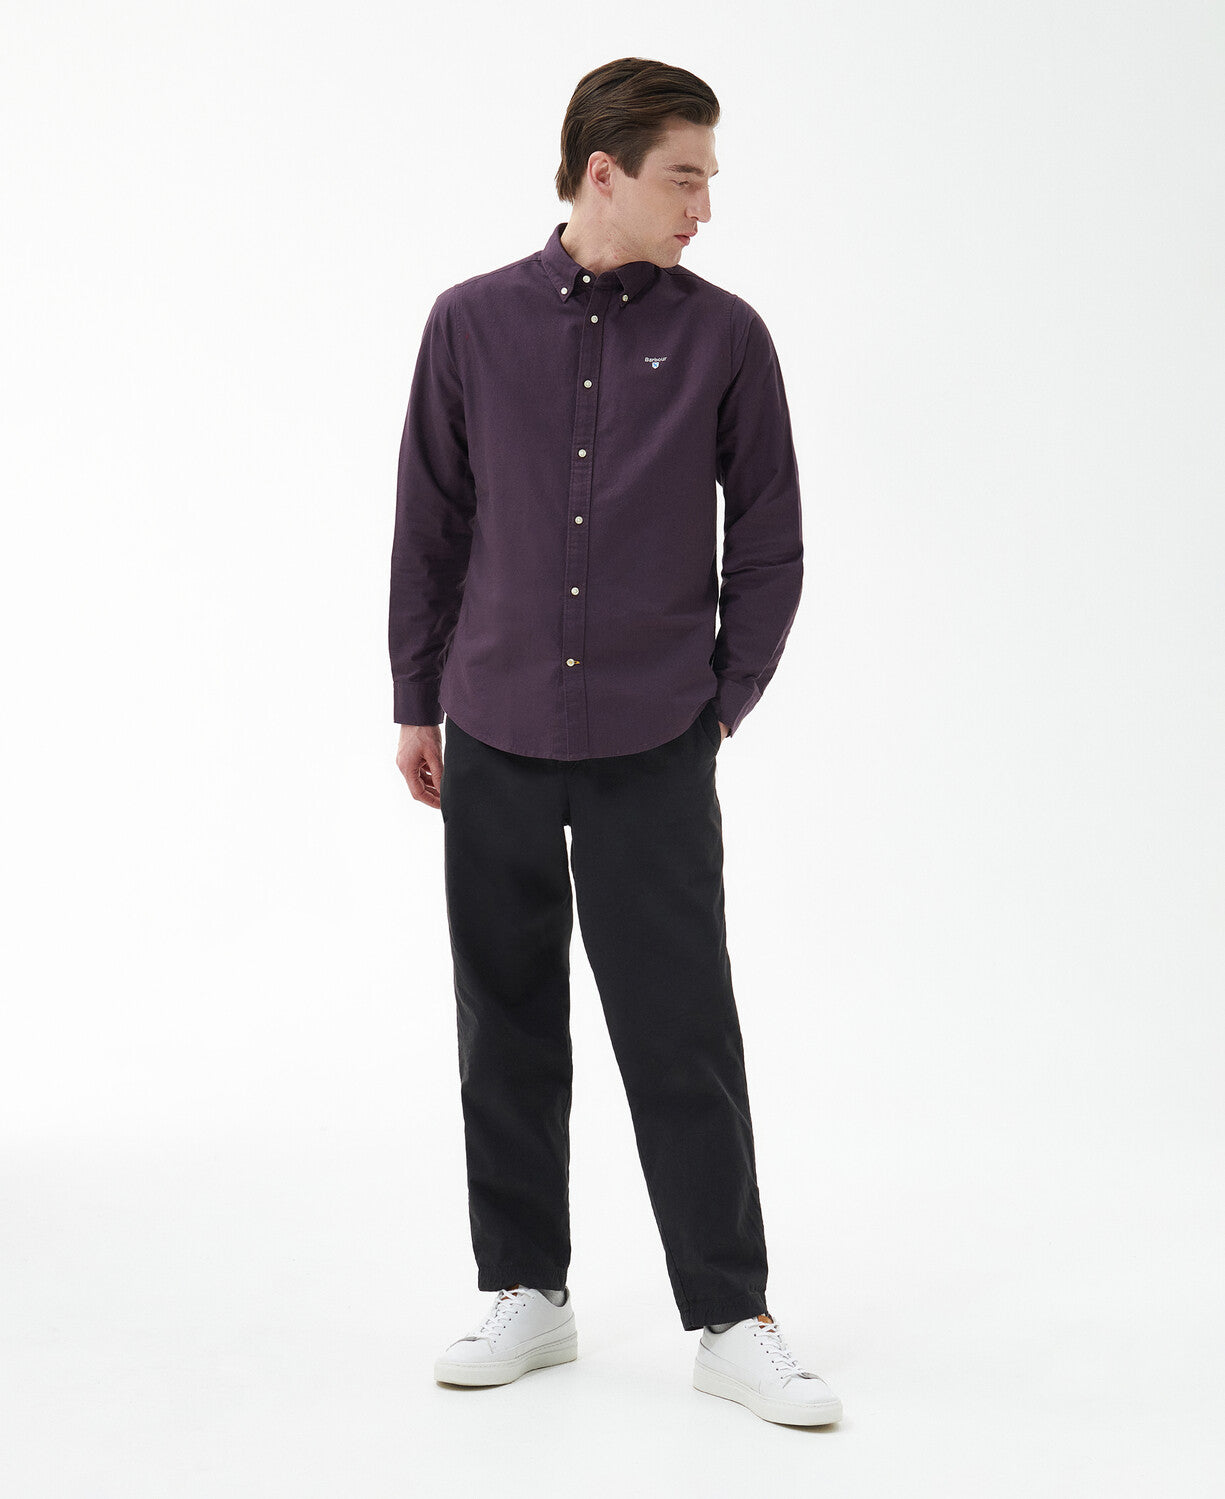 Barbour Oxtown Tailored Shirt - Fig